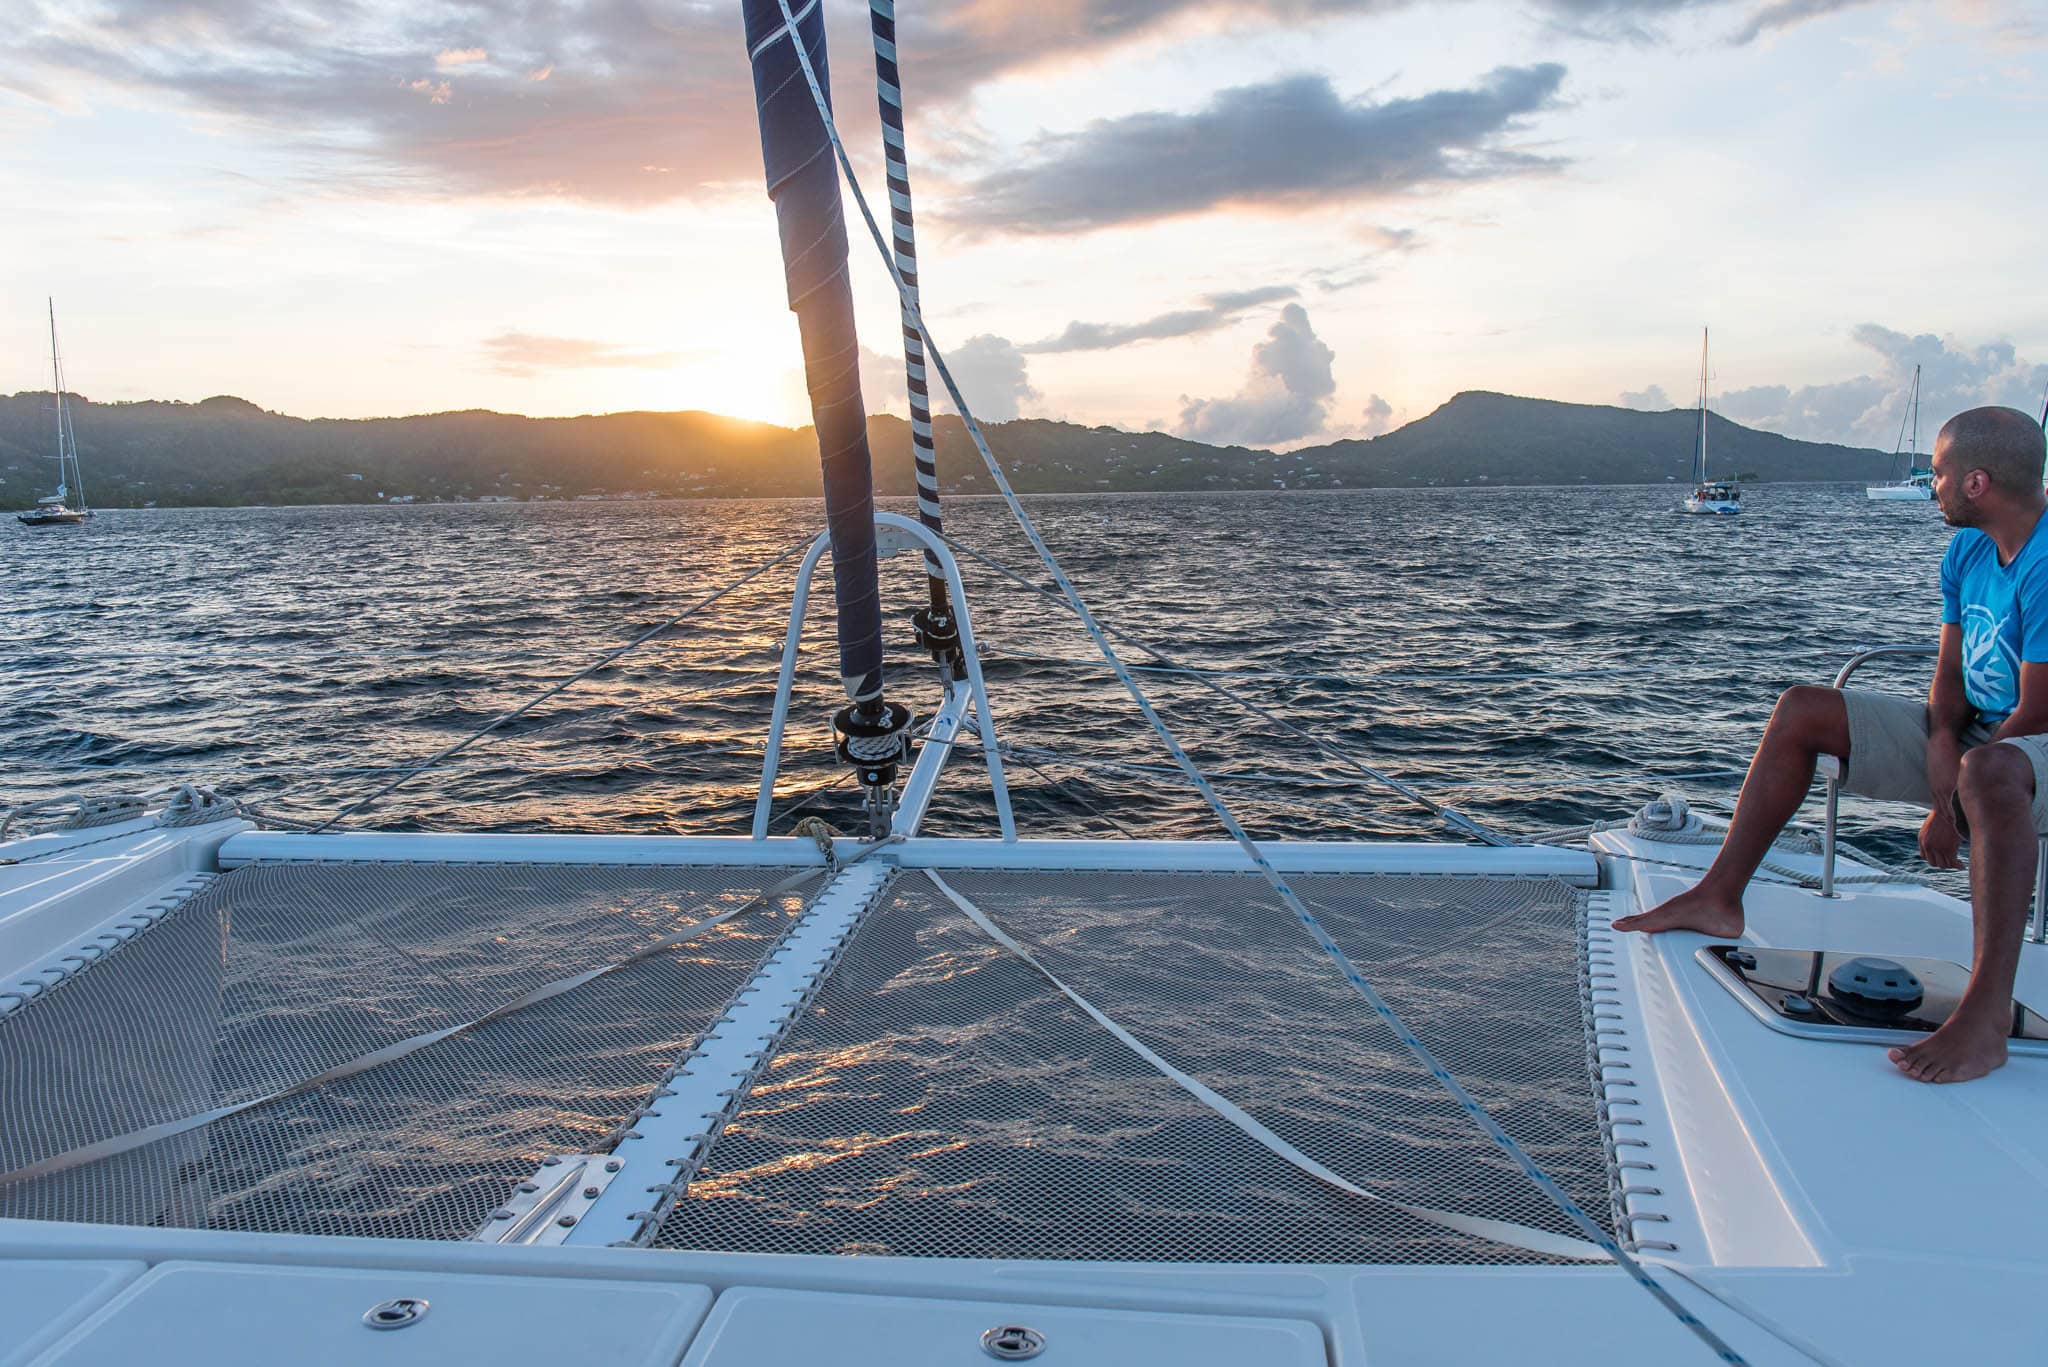 Win a Sailing Vacation in the Grenadines by Patrick Bennett